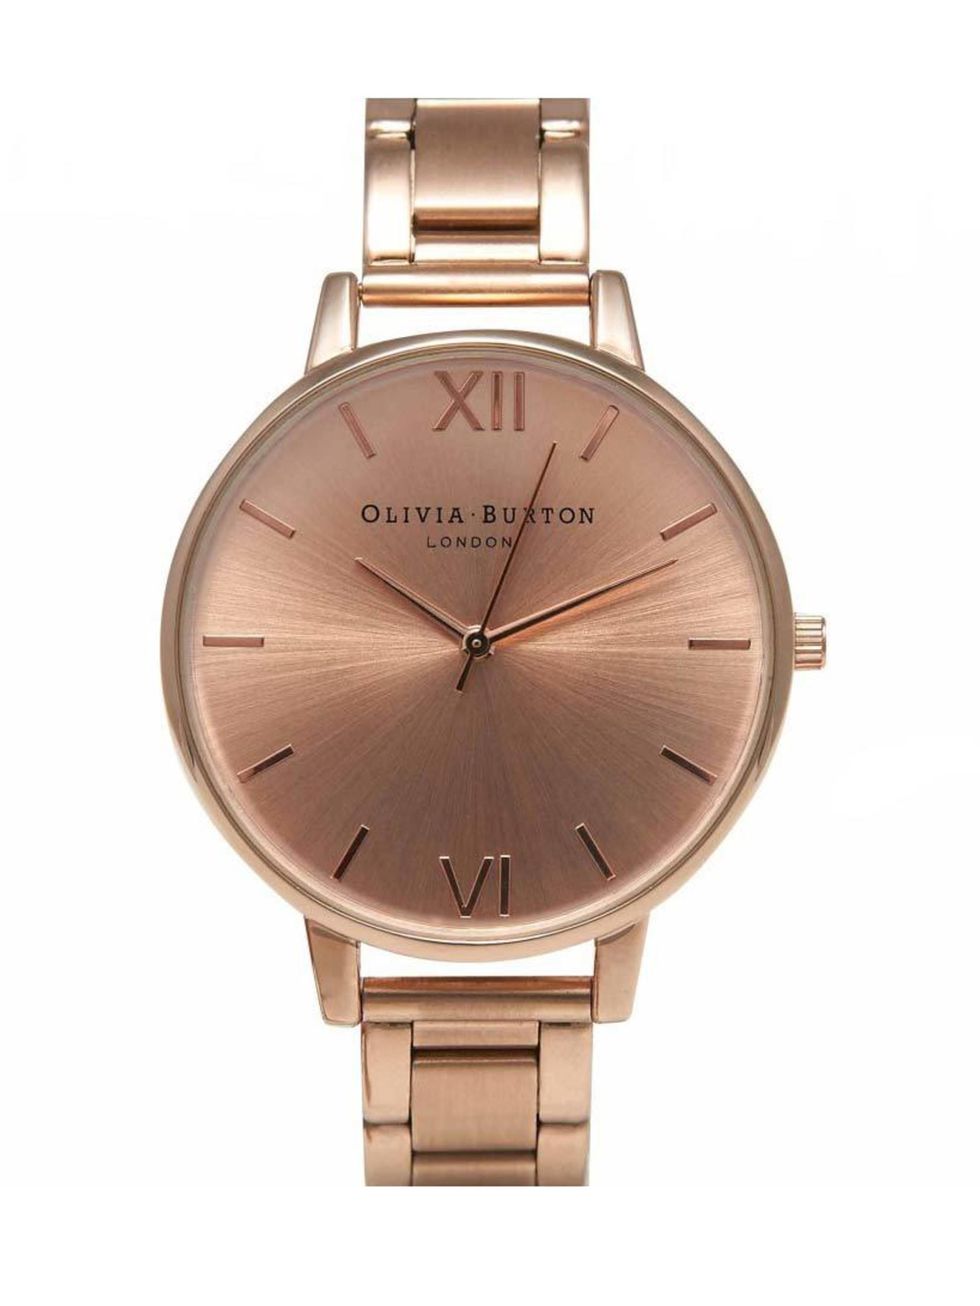 <p>If you saw Executive Fashion Director Kirsty Dale's jam-packed schedule, you'd know why a good watch is so essential.</p>

<p> </p>

<p><a href="http://www.oliviaburton.com/shop/big-dial/big-dial-bracelet-rose-gold/" target="_blank">Olivia Burton</a> w